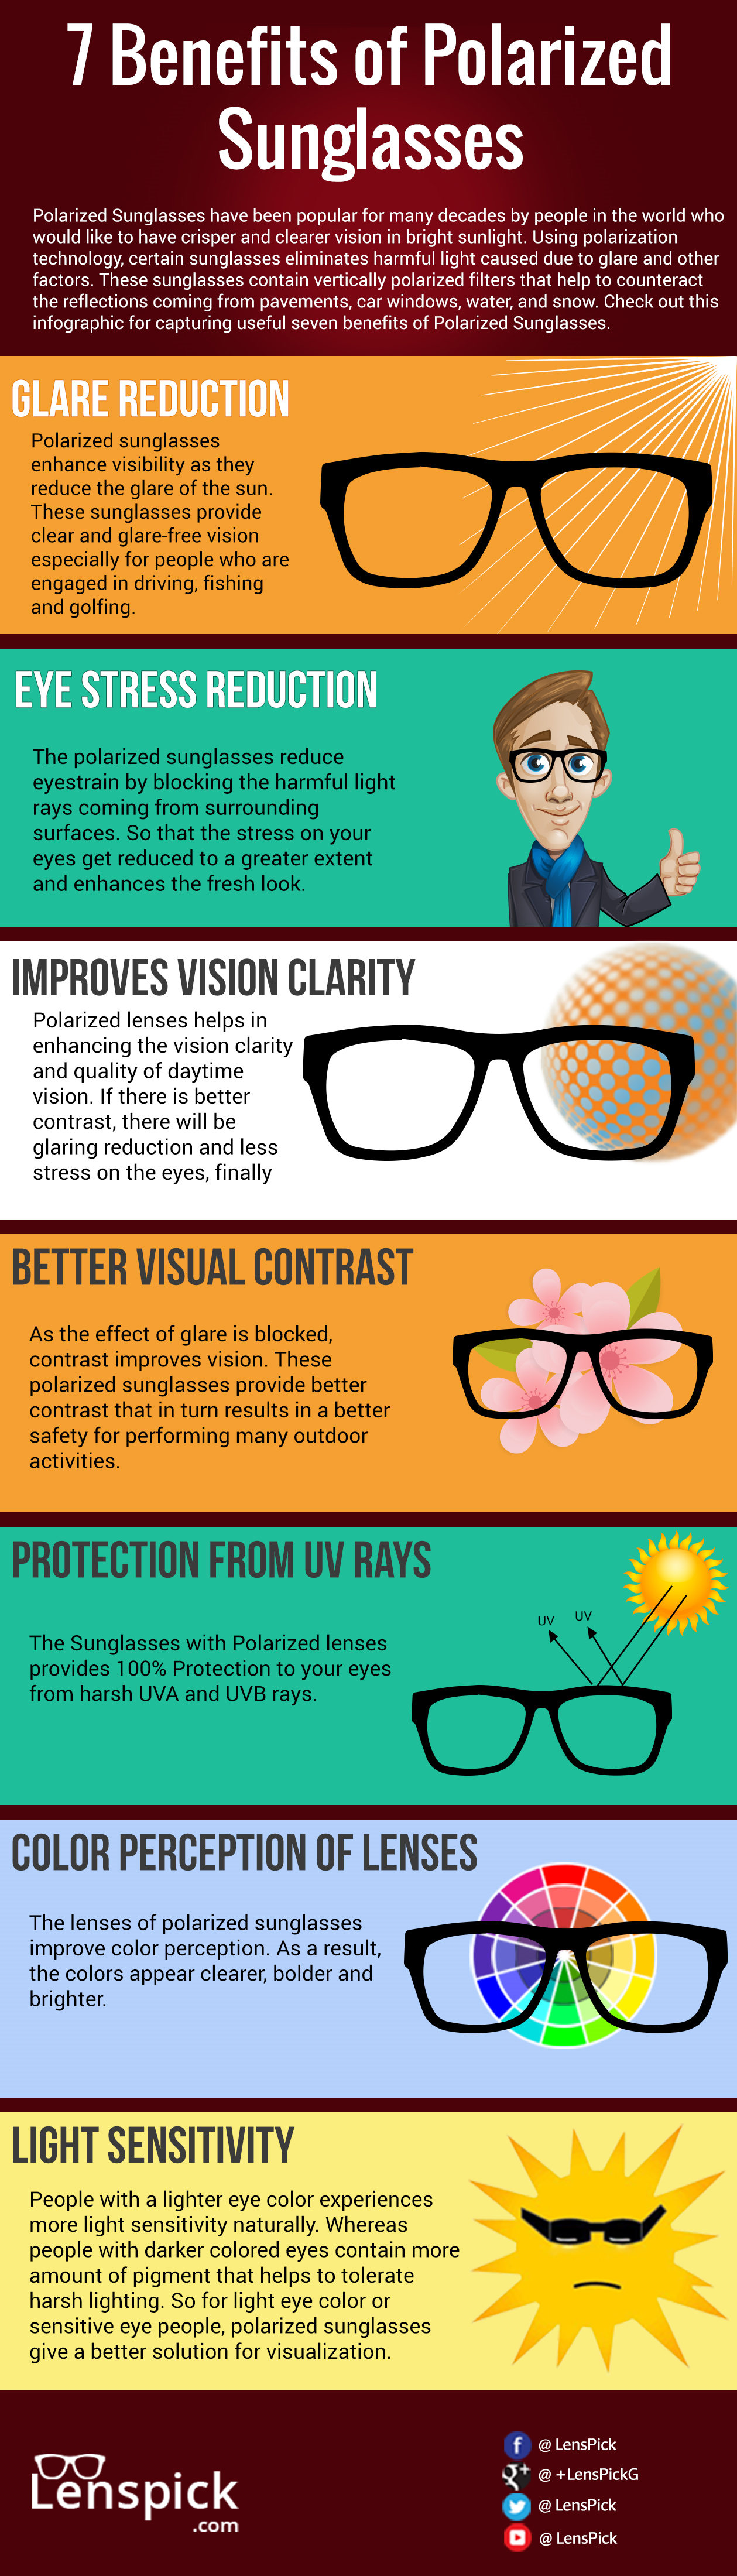 Sunglasses: what are TAC polarized lenses anyway? | Amevie